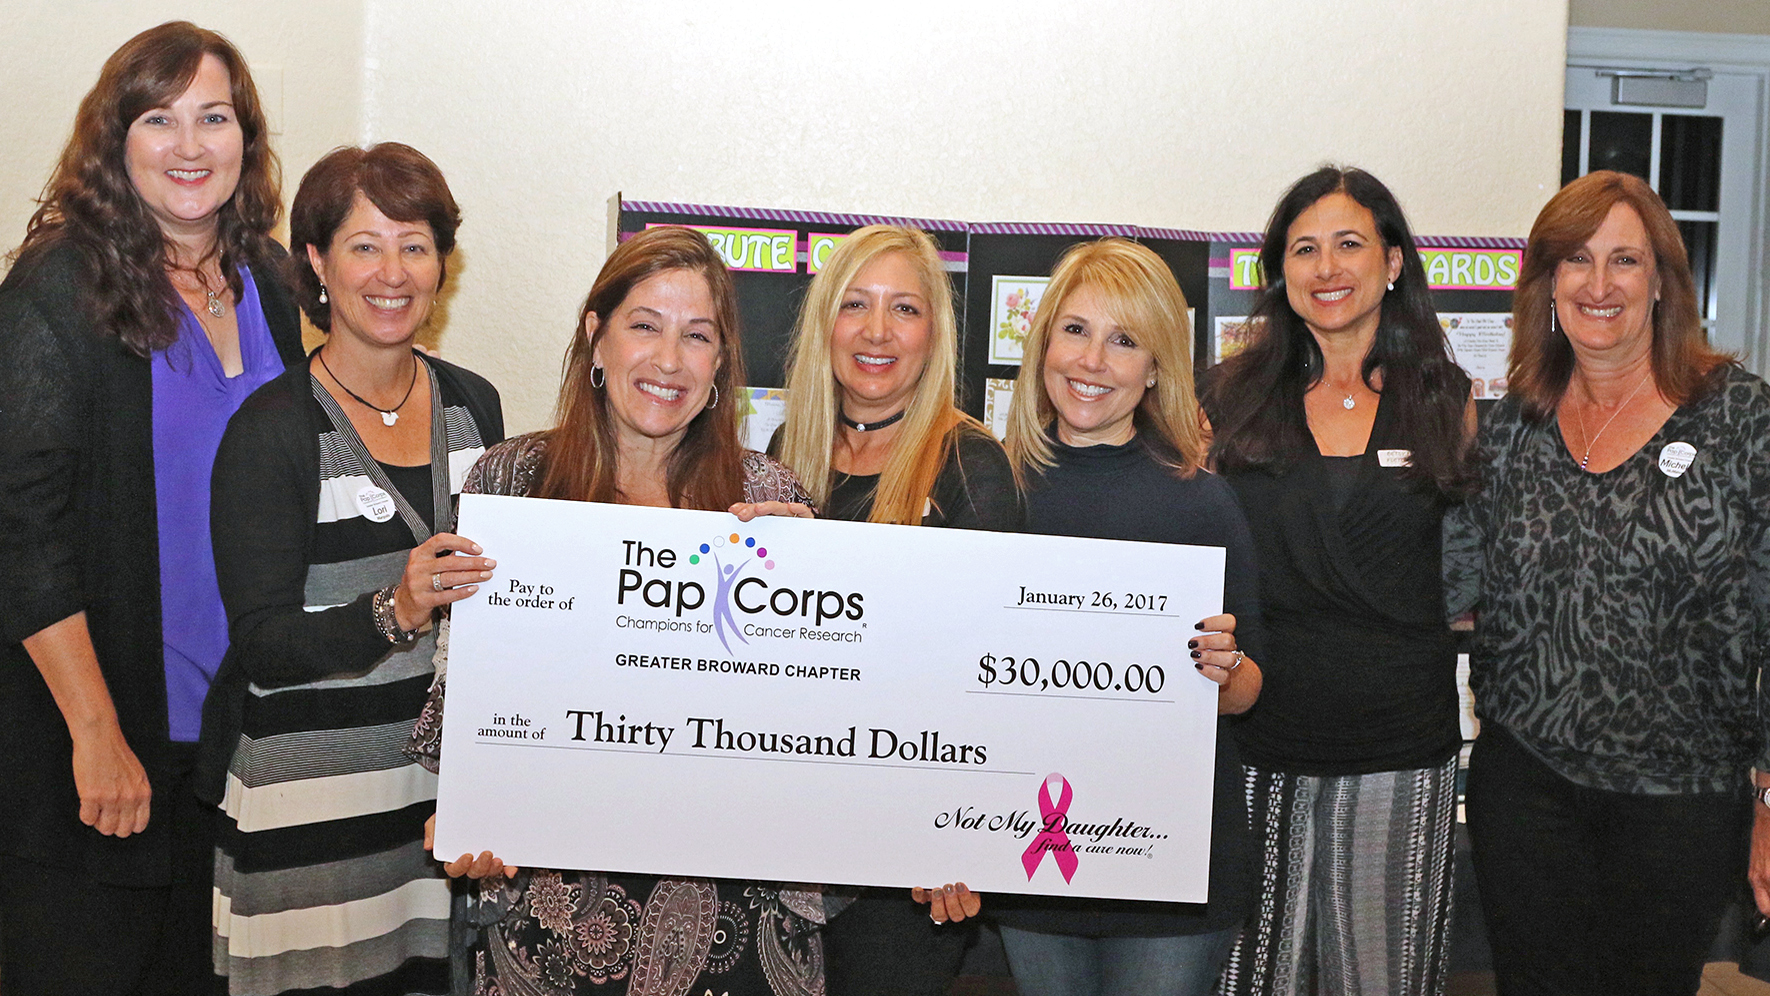 Check presentation.  Left to Right: Parkland Mayor Christine Hunschofsky; Lori Margolis, President Greater Broward Chapter, The Pap Corps.; Jody Sternfield, Debi Weisman, Denyse Hostig, Betsy Fletcher from Not My Daughter; and Michele McMahon, Executive V.P., Greater Broward Chapter, The Pap Corps.